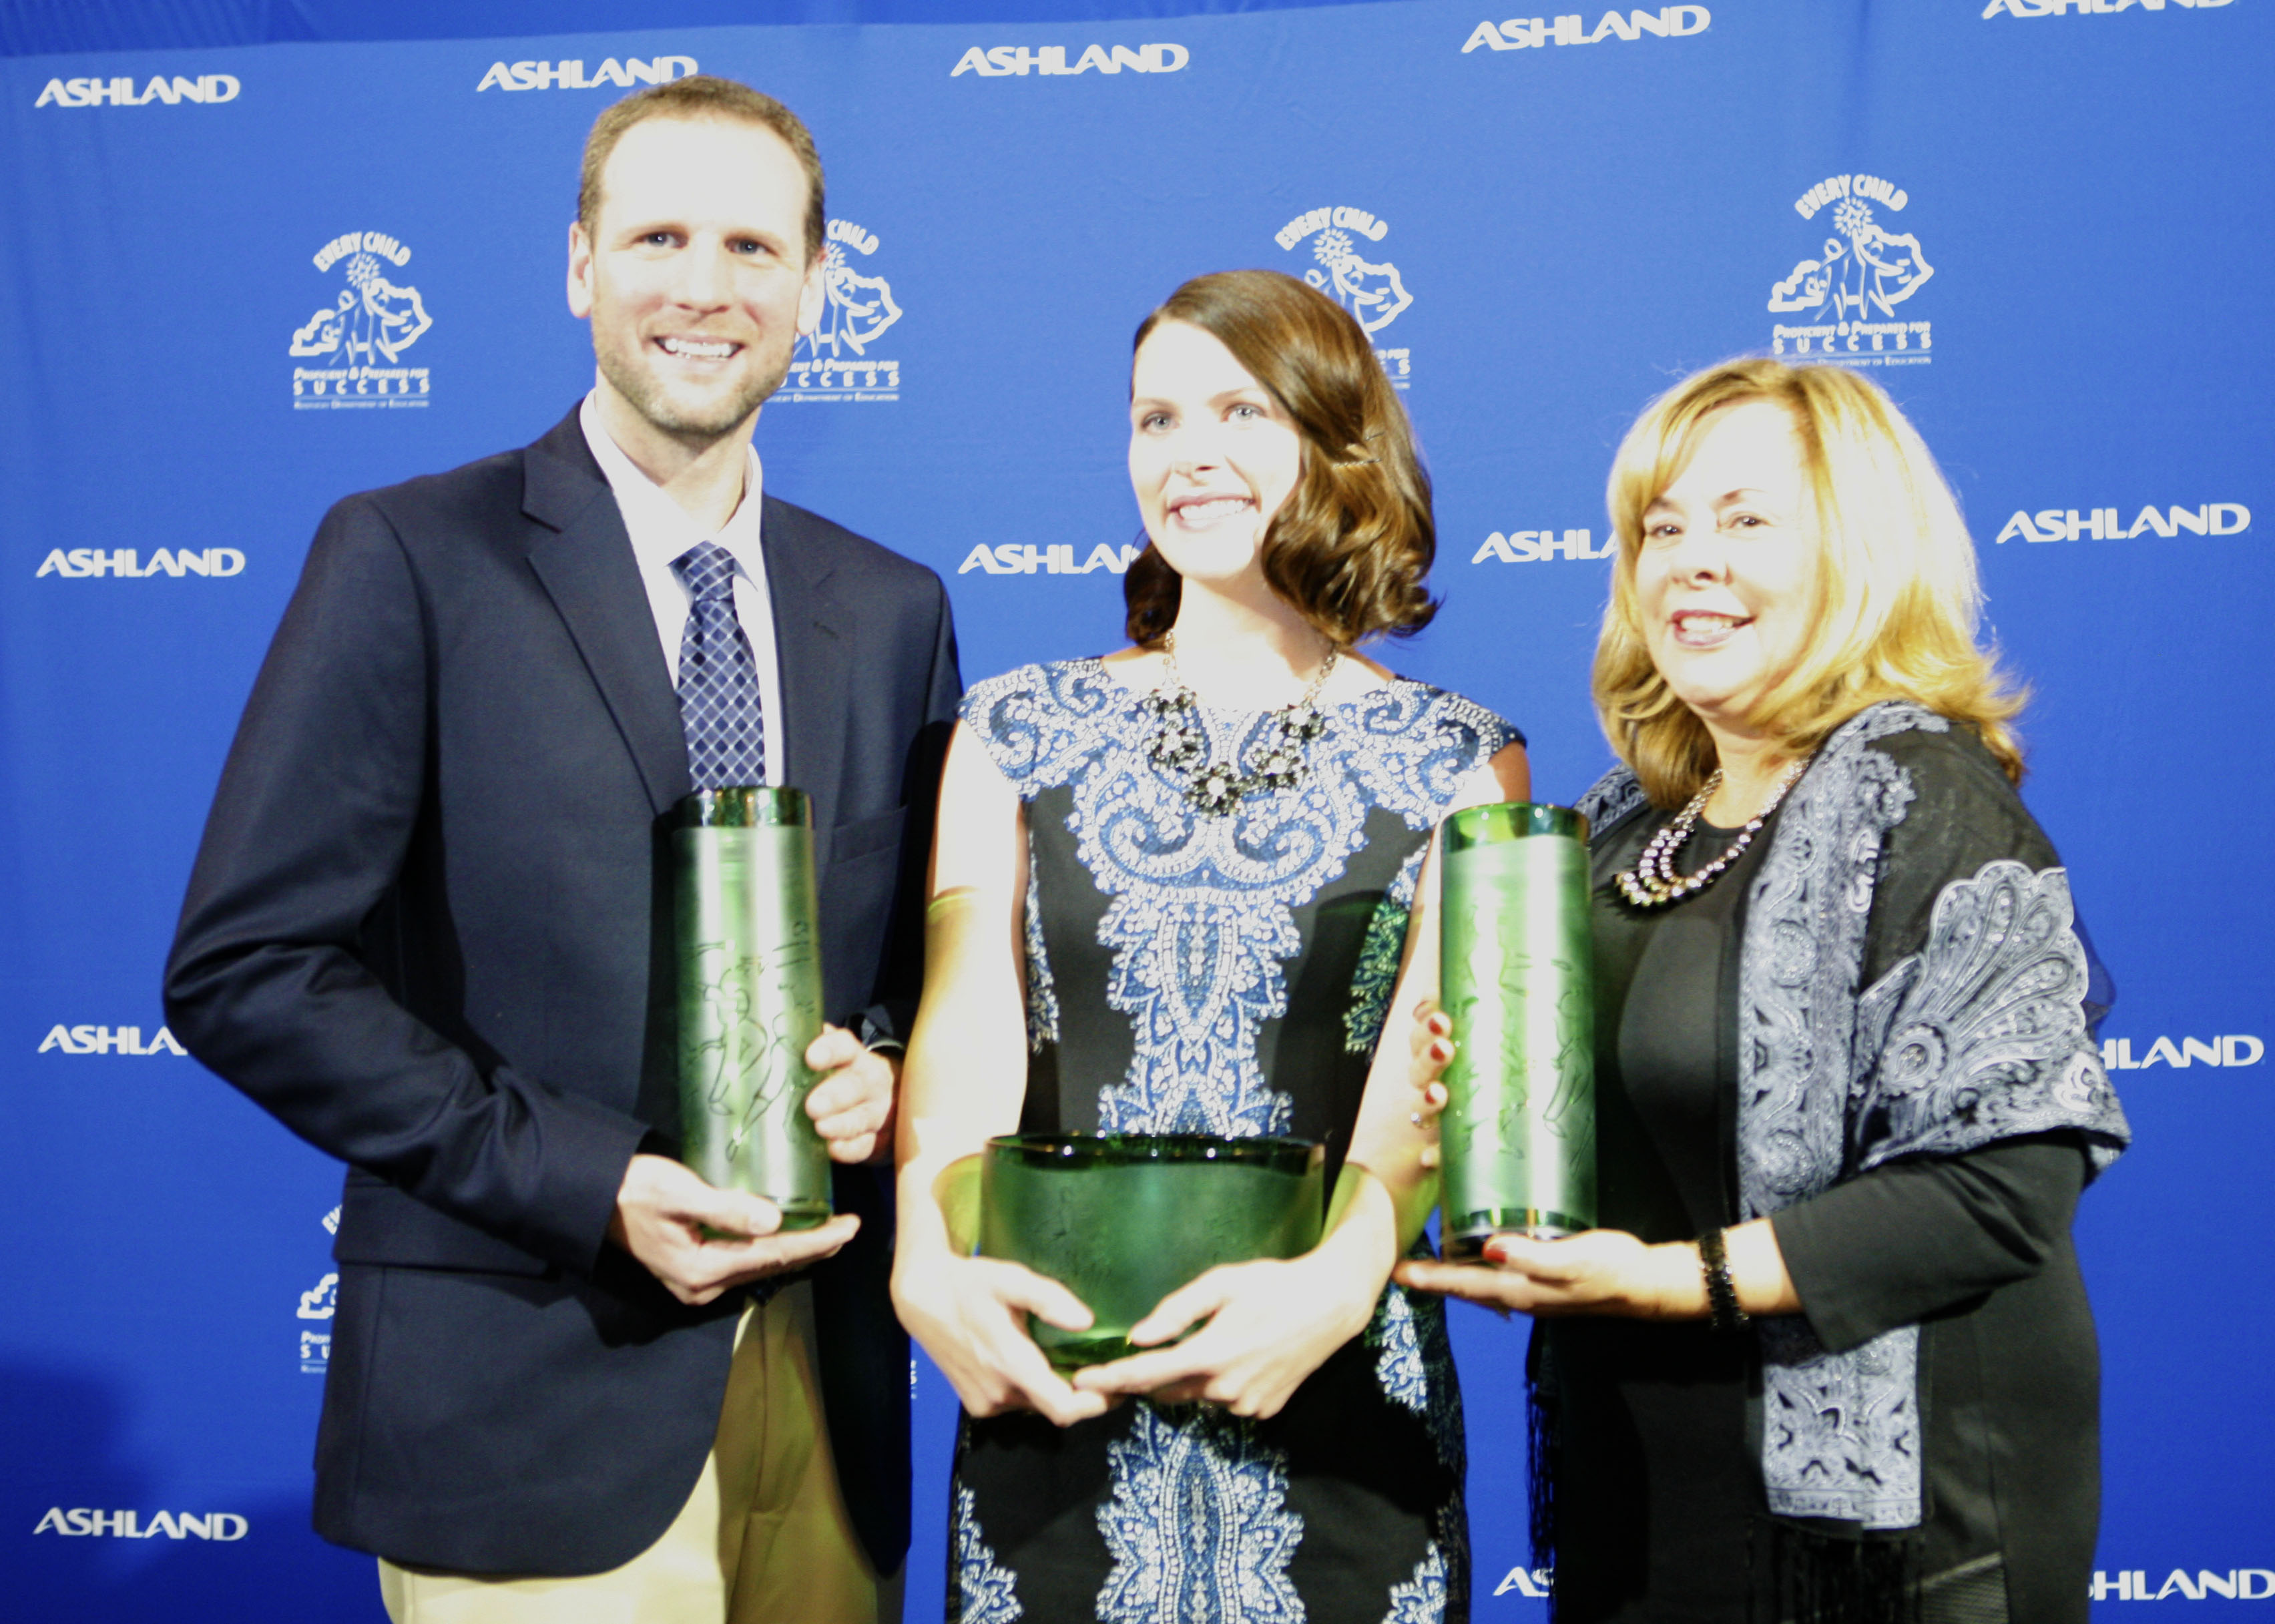 Ashland Inc. and the Kentucky Department of Education announced the 2016 Teachers of the Year winners today at a ceremony at the Capitol Rotunda in Frankfort. Joshua DeWar of Jefferson County, from left, is the 2016 Elementary School Teacher of the Year; Ashley Lamb-Sinclair of the Oldham County school district is the 2016 Kentucky Teacher of the Year; and Karen Mallonee, of Daviess County, is the 2016 Middle School Teacher of the Year. Photo by Jennifer Ginn, Oct. 20, 2015